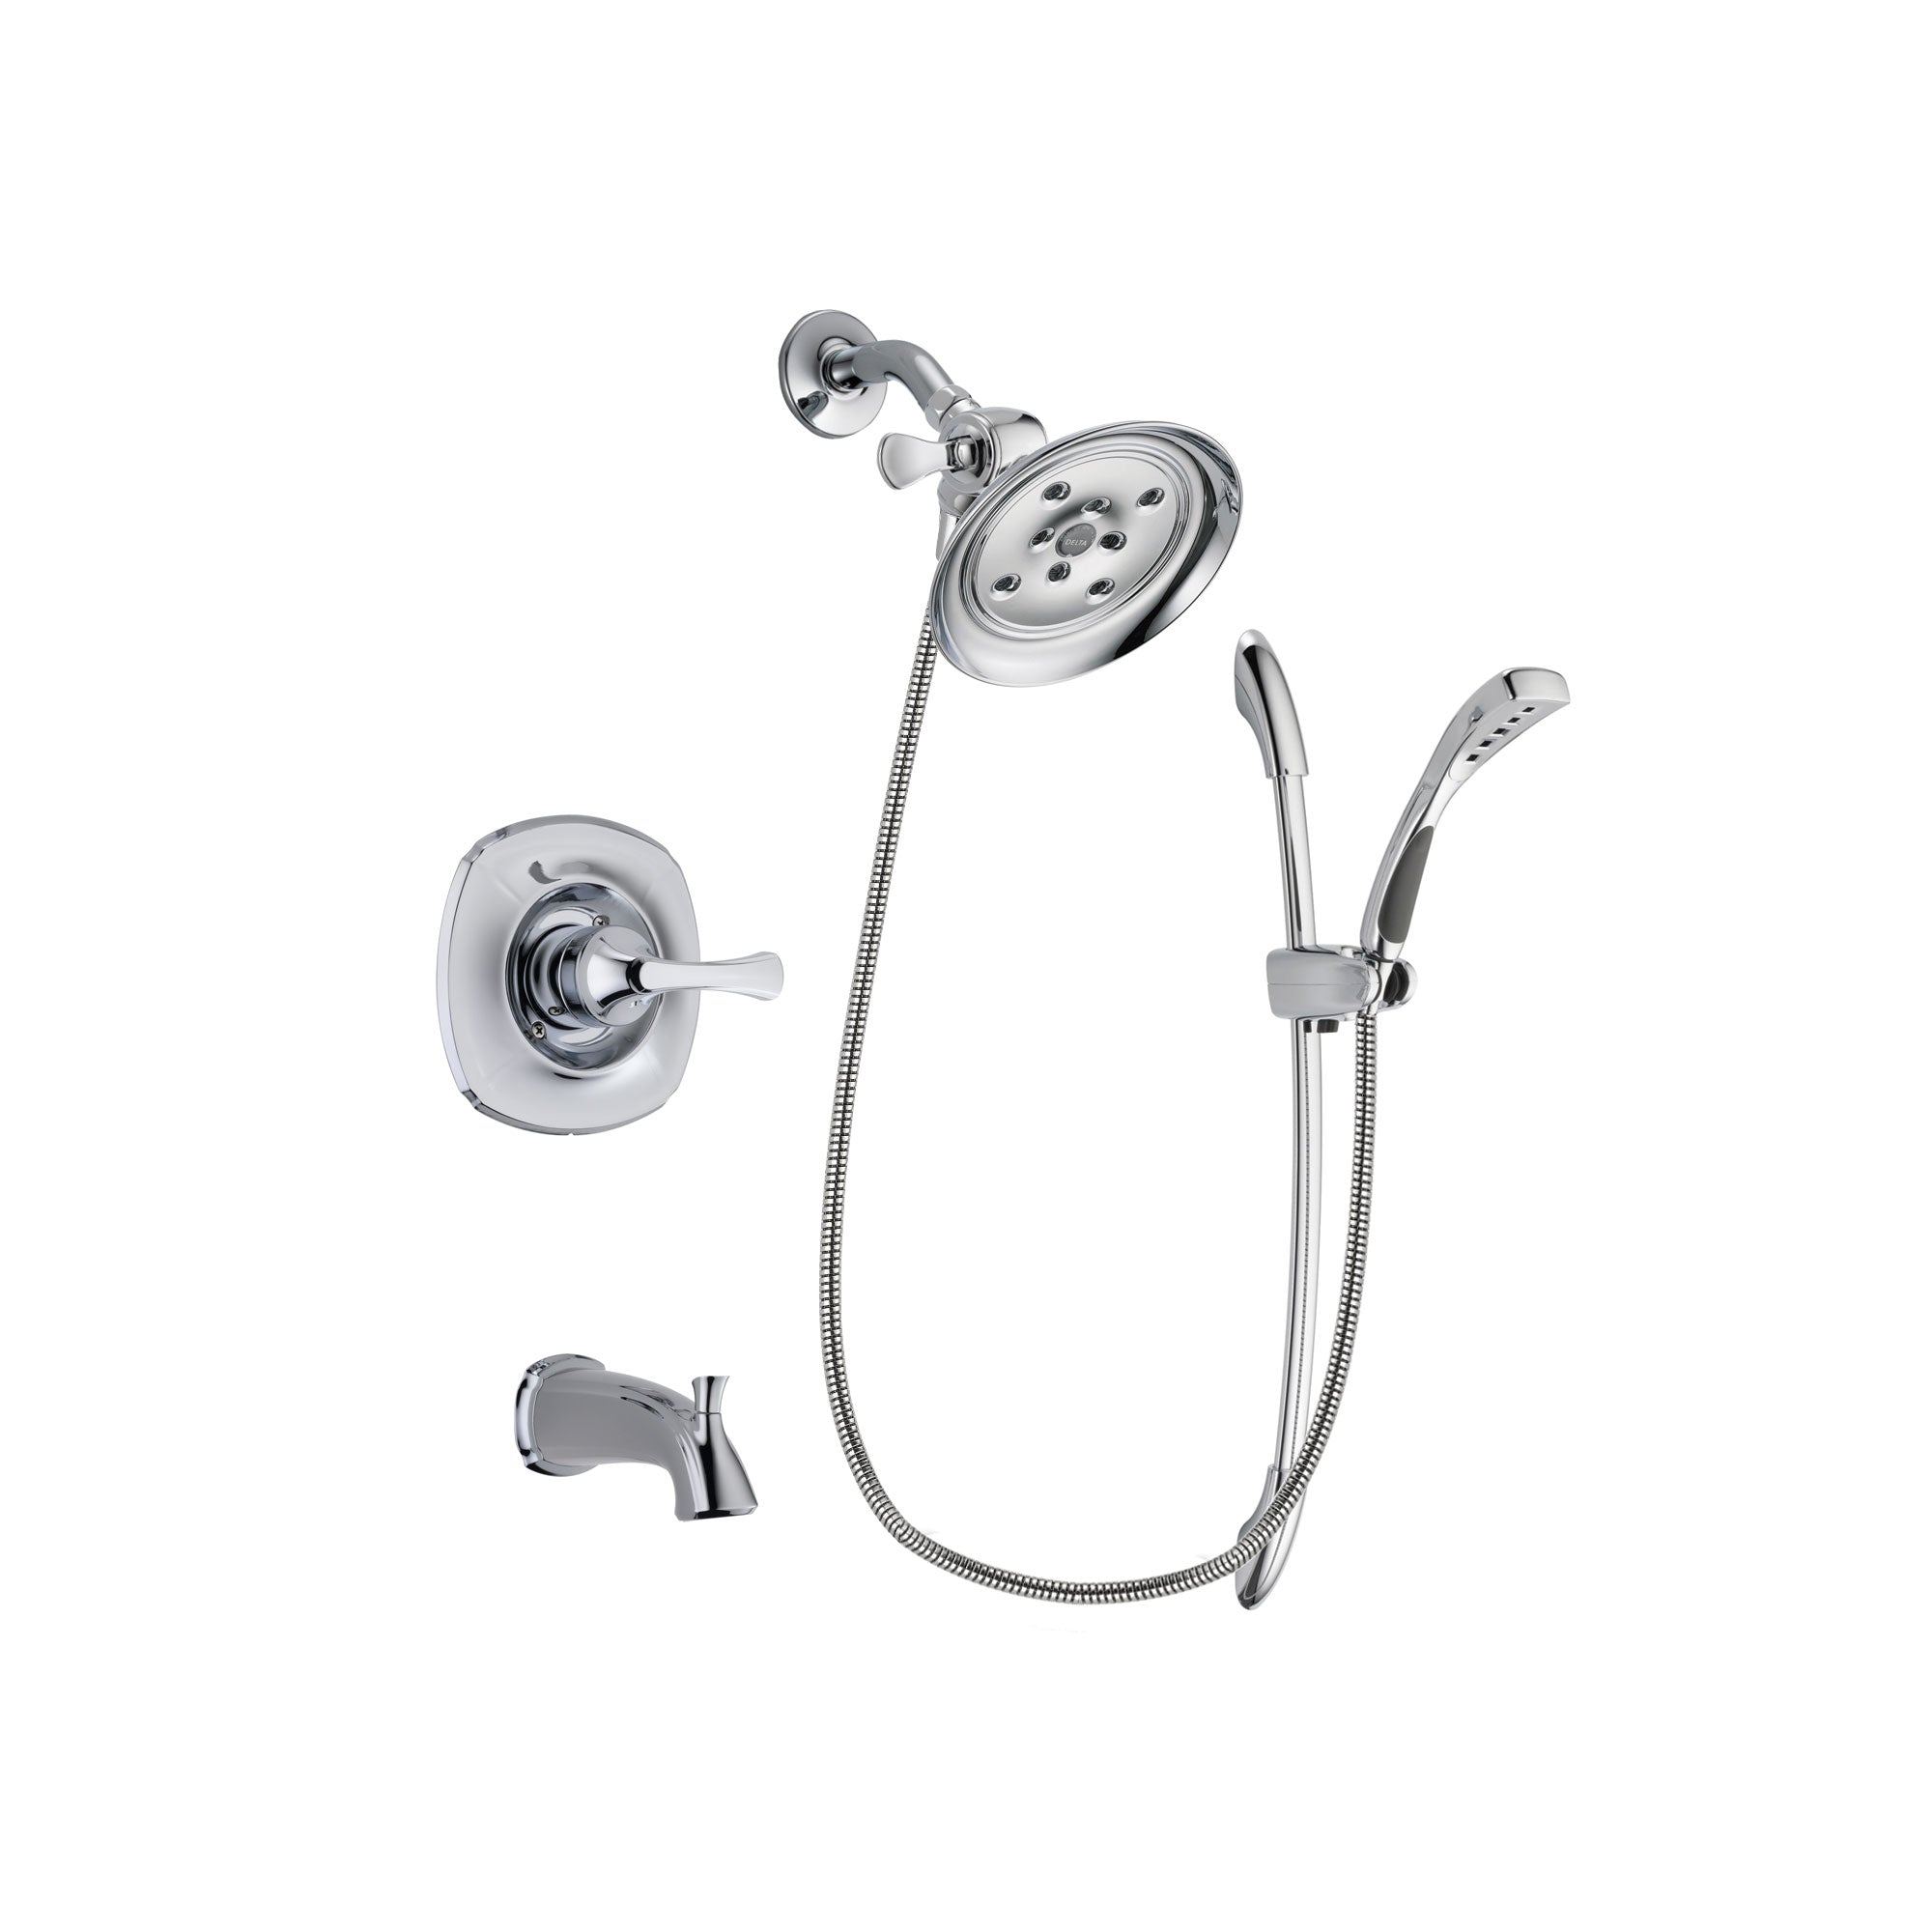 Delta Addison Chrome Finish Tub and Shower Faucet System Package with Large Rain Showerhead and Handheld Shower with Slide Bar Includes Rough-in Valve and Tub Spout DSP0509V